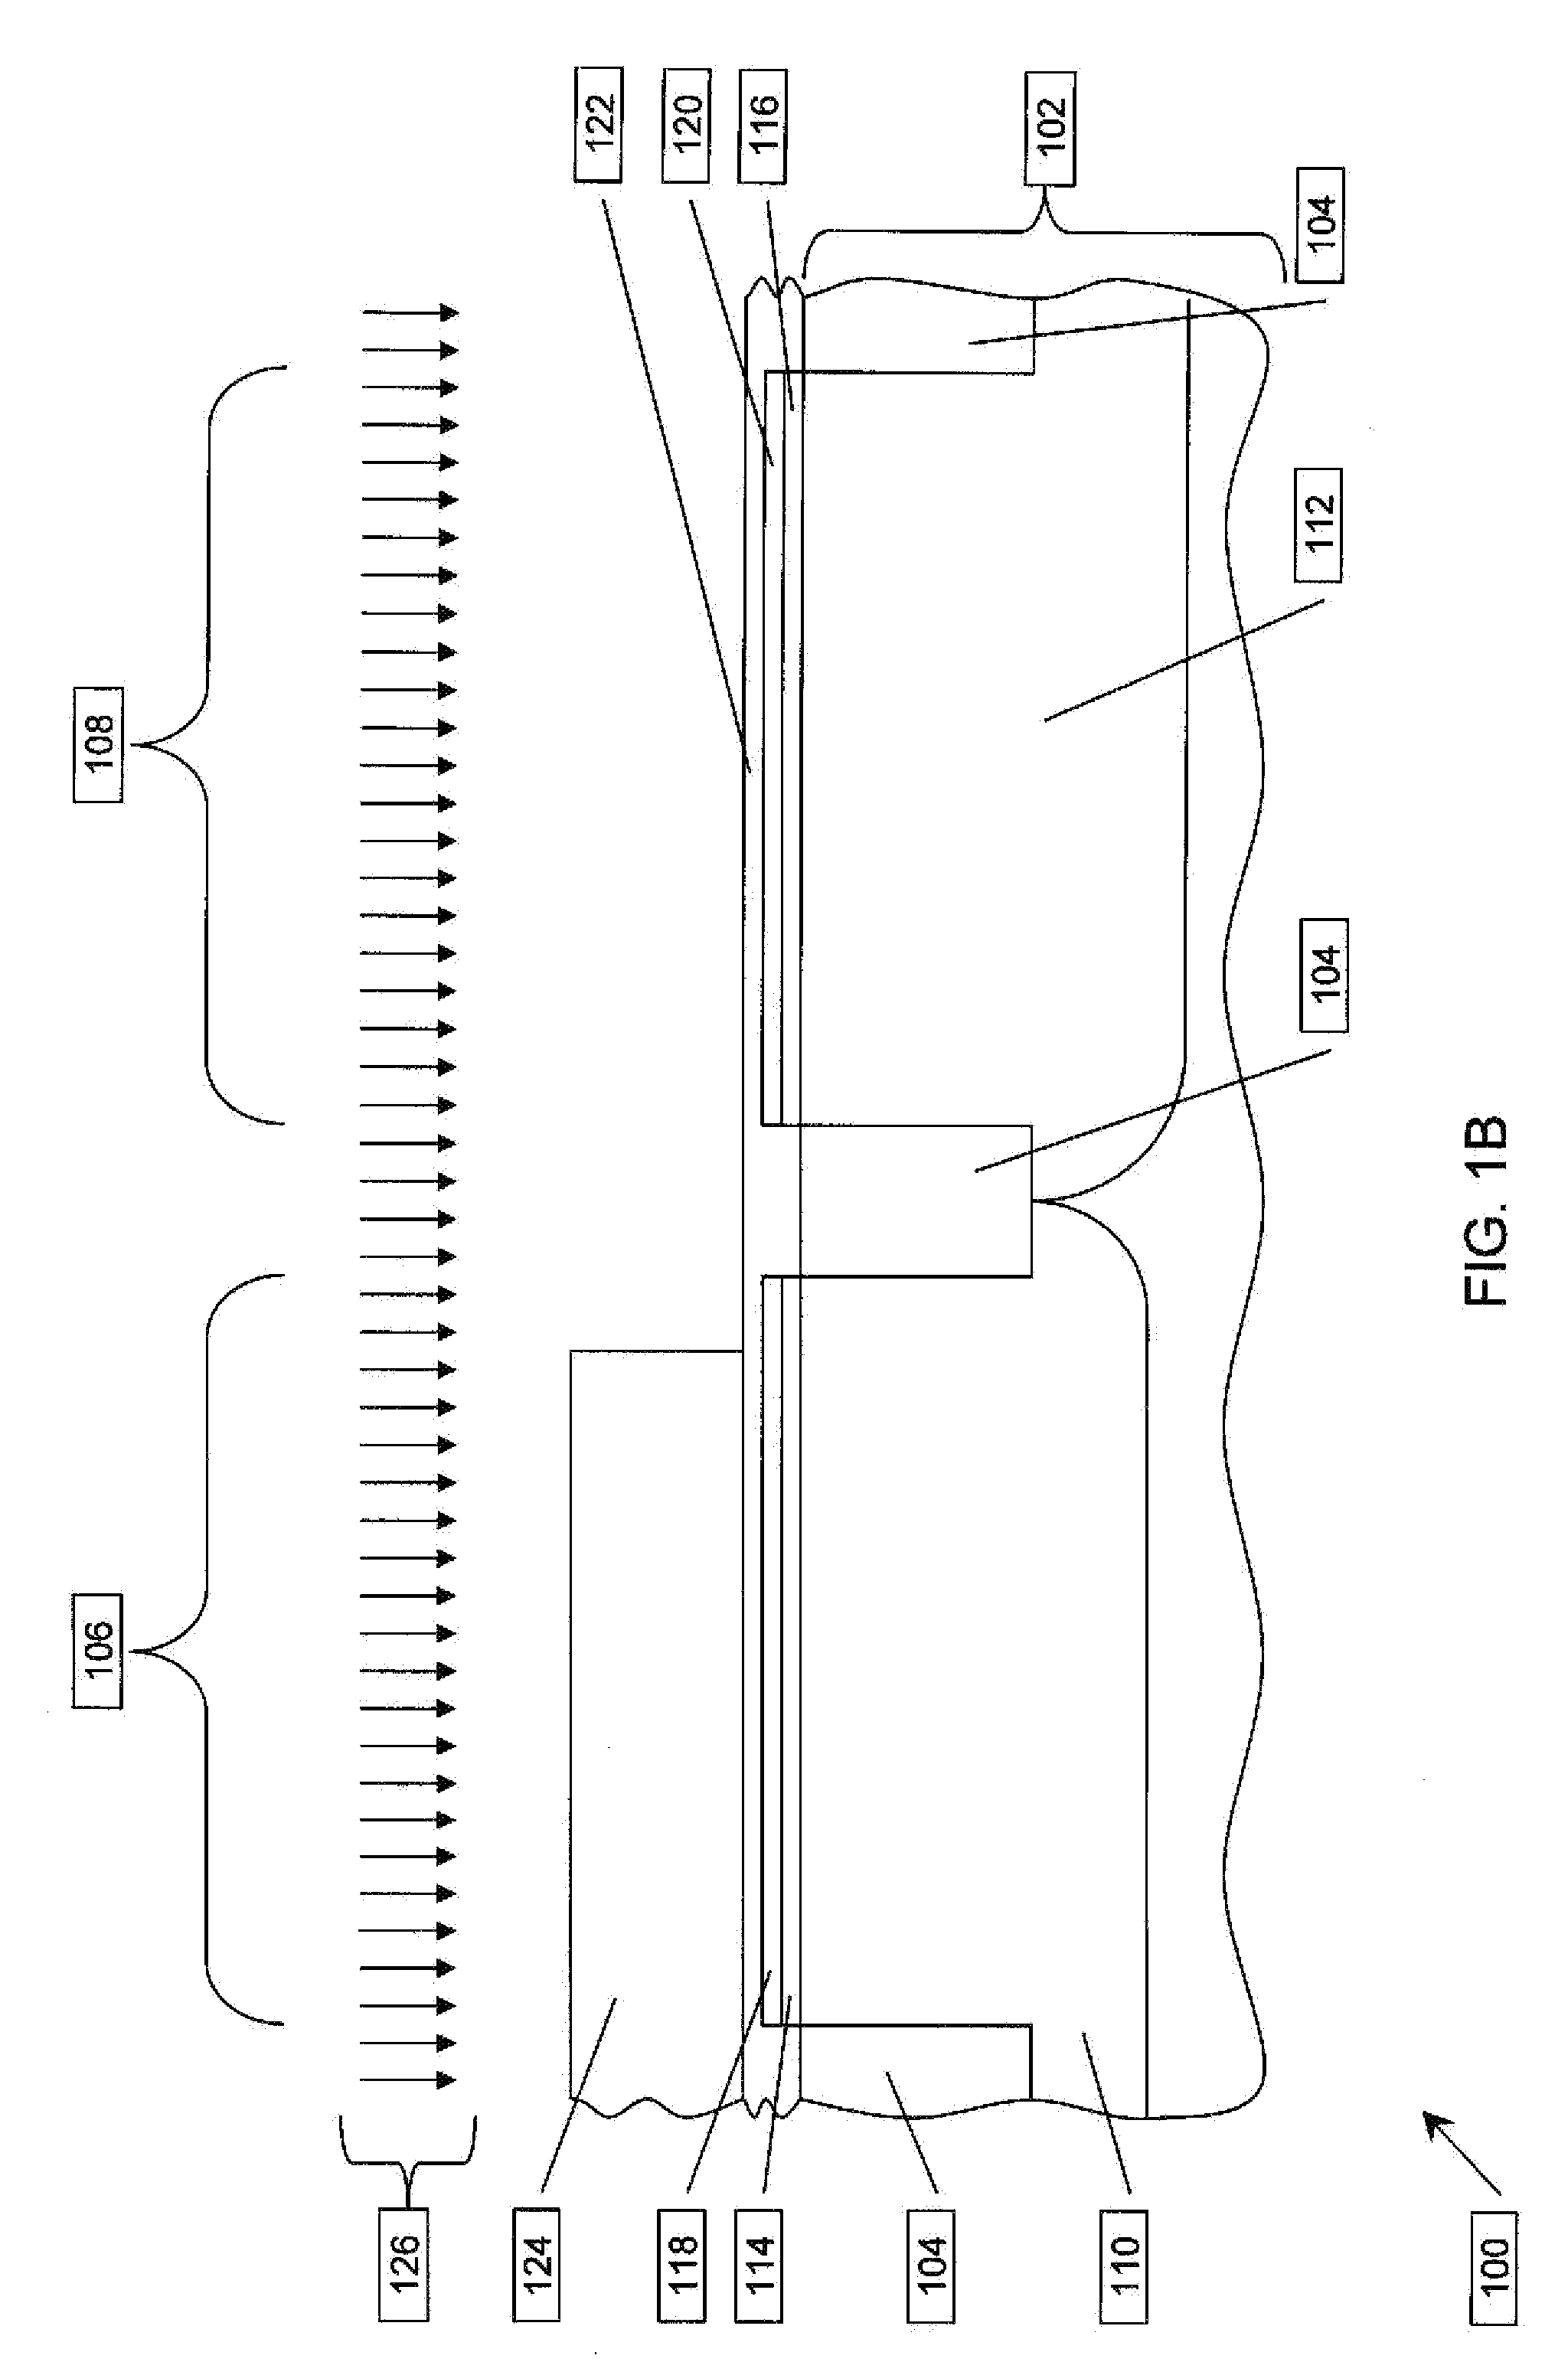 Engineered oxygen profile in metal gate electrode and nitrided high-k gate dielectrics structure for high performance pmos devices